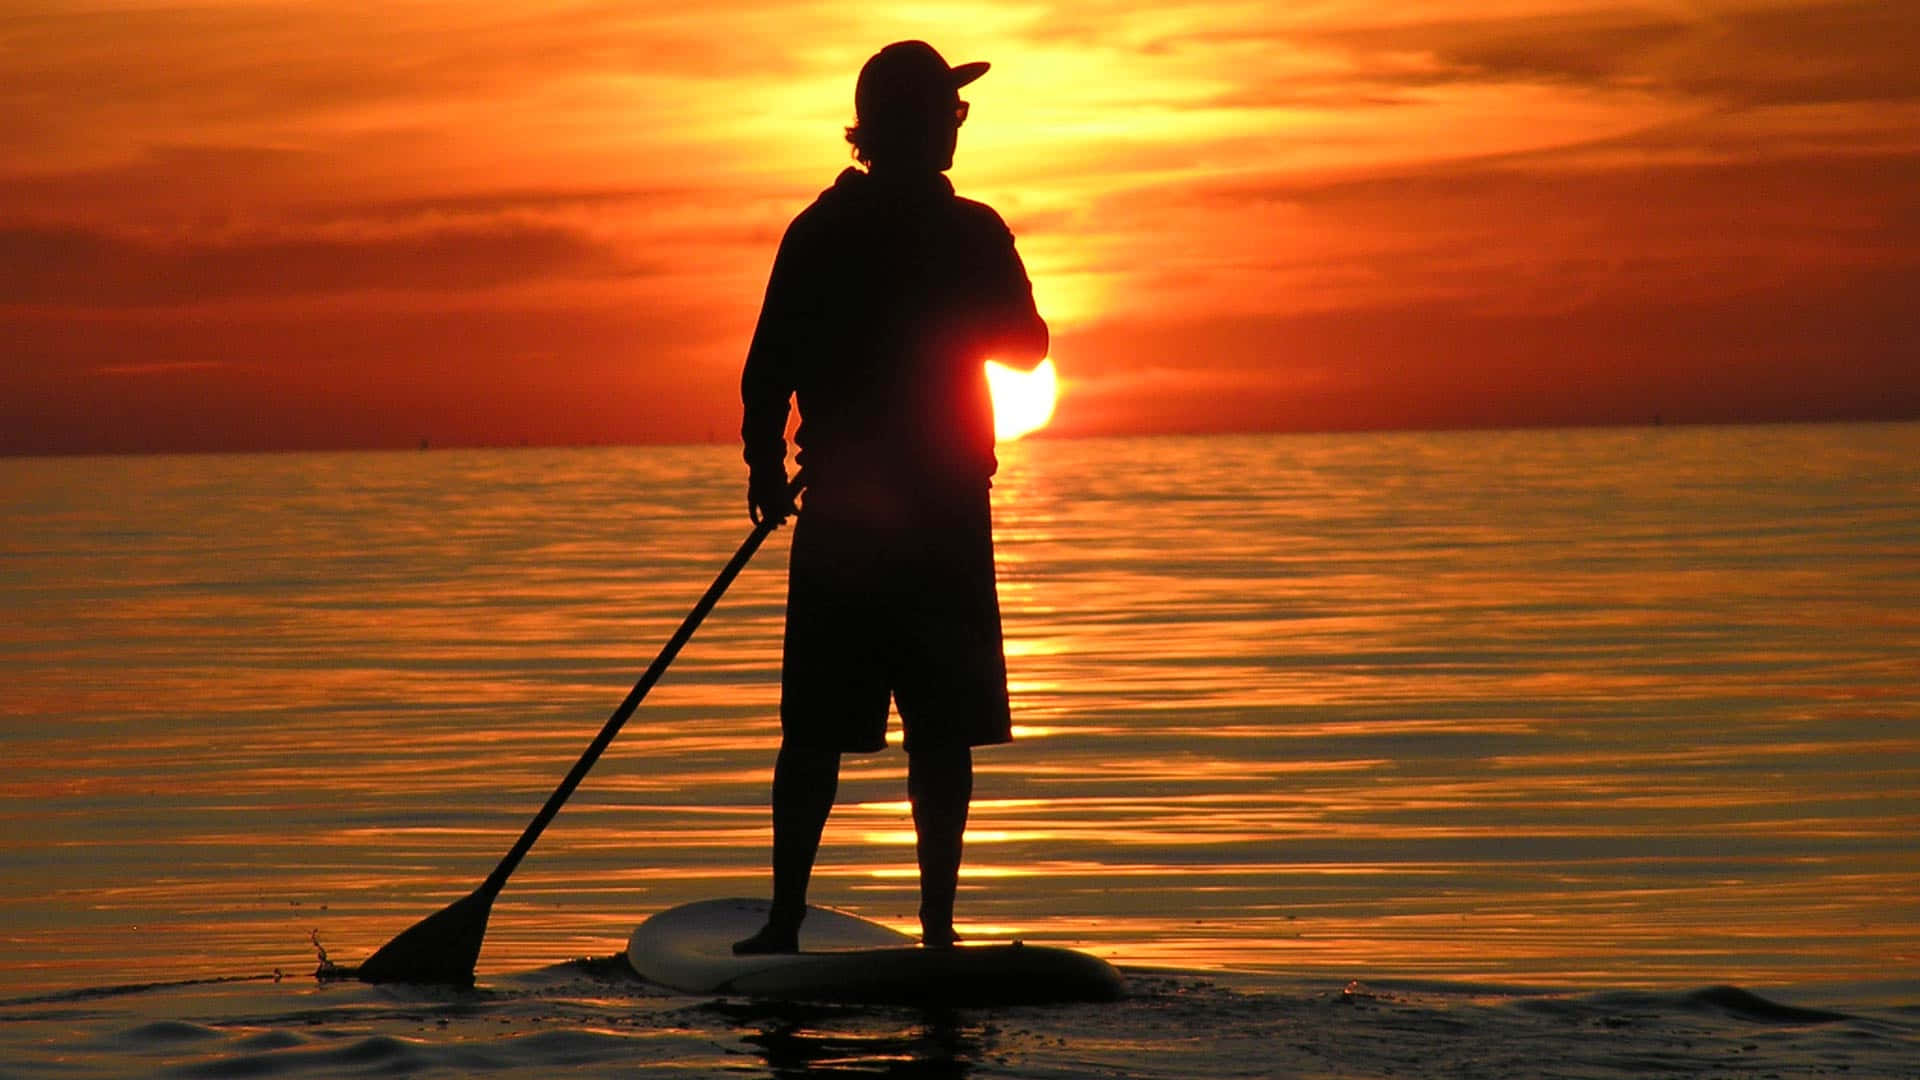 Tranquil Paddleboarding at Sunset Wallpaper